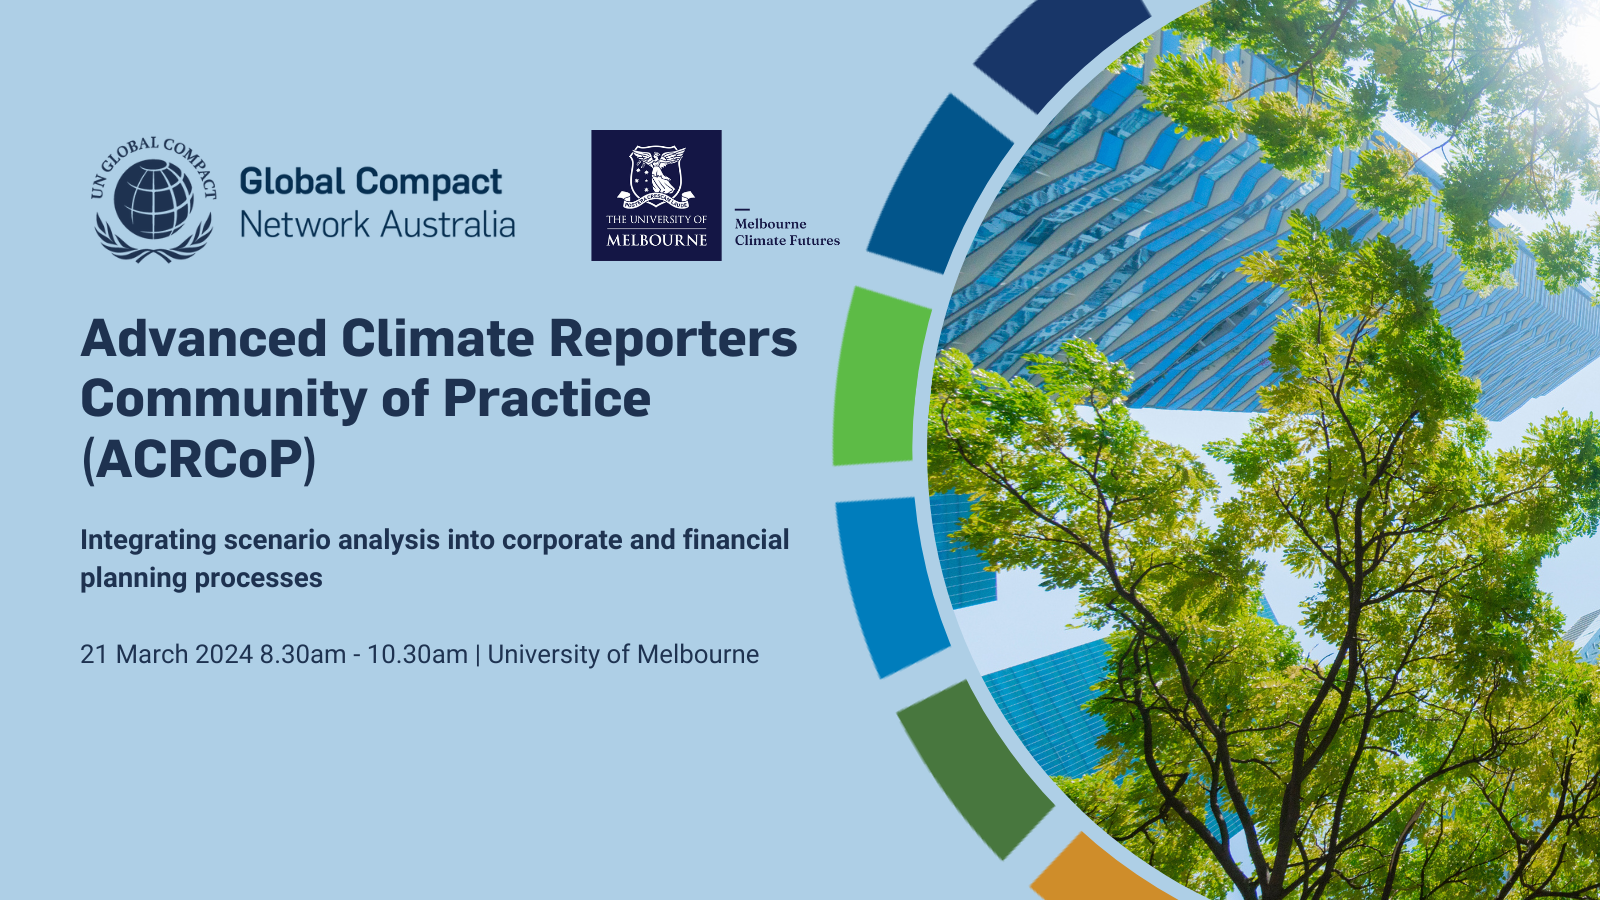 Advanced Climate Reporters Community of Practice (ACRCoP) | Session 1: Integrating scenario analysis into corporate and financial planning processes